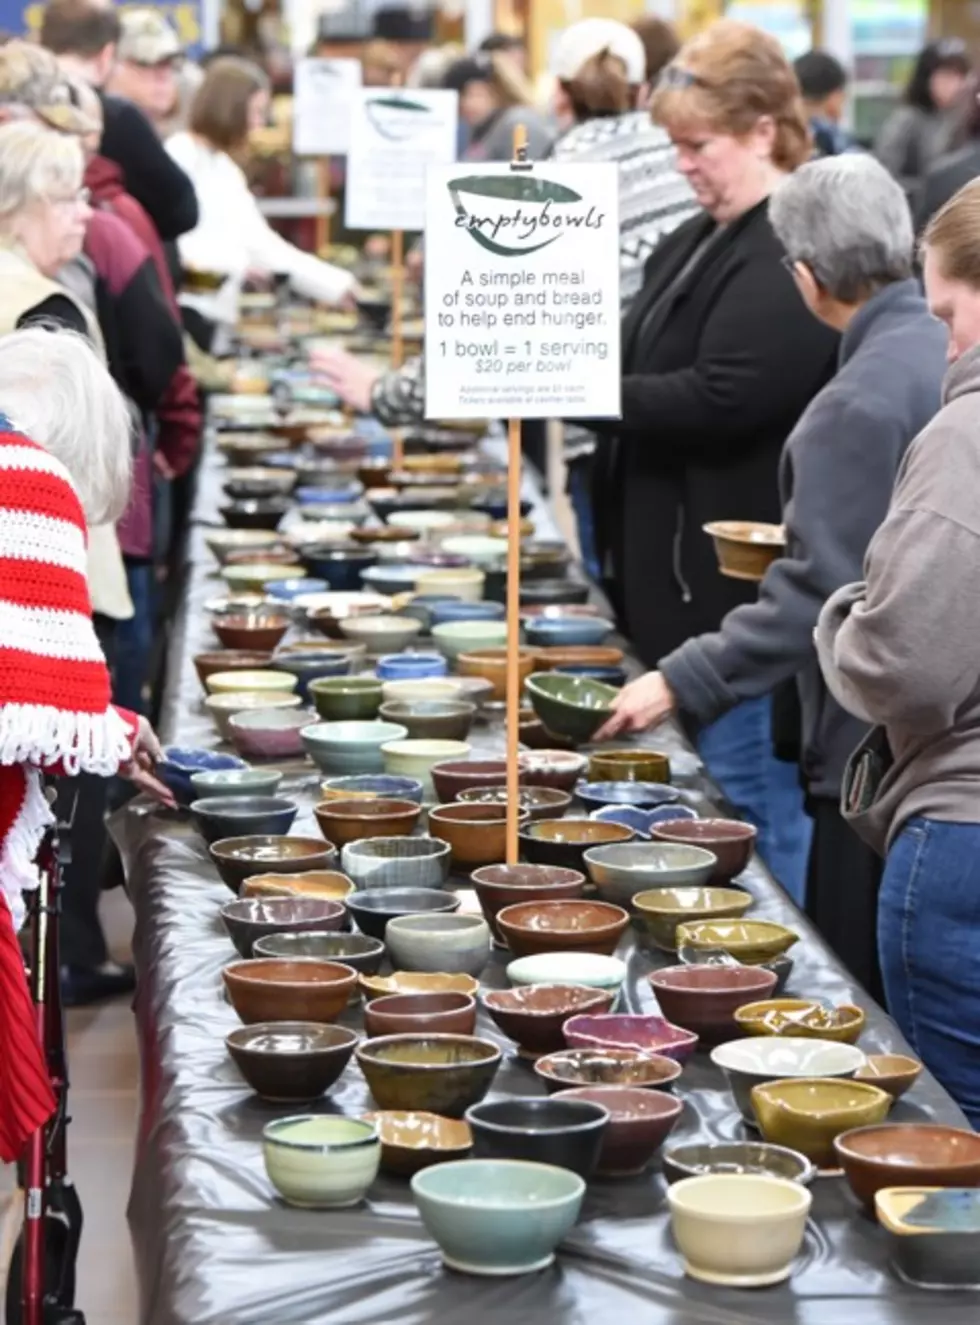 Top Five Reasons All Texans Should Go To The Empty Bowls Event